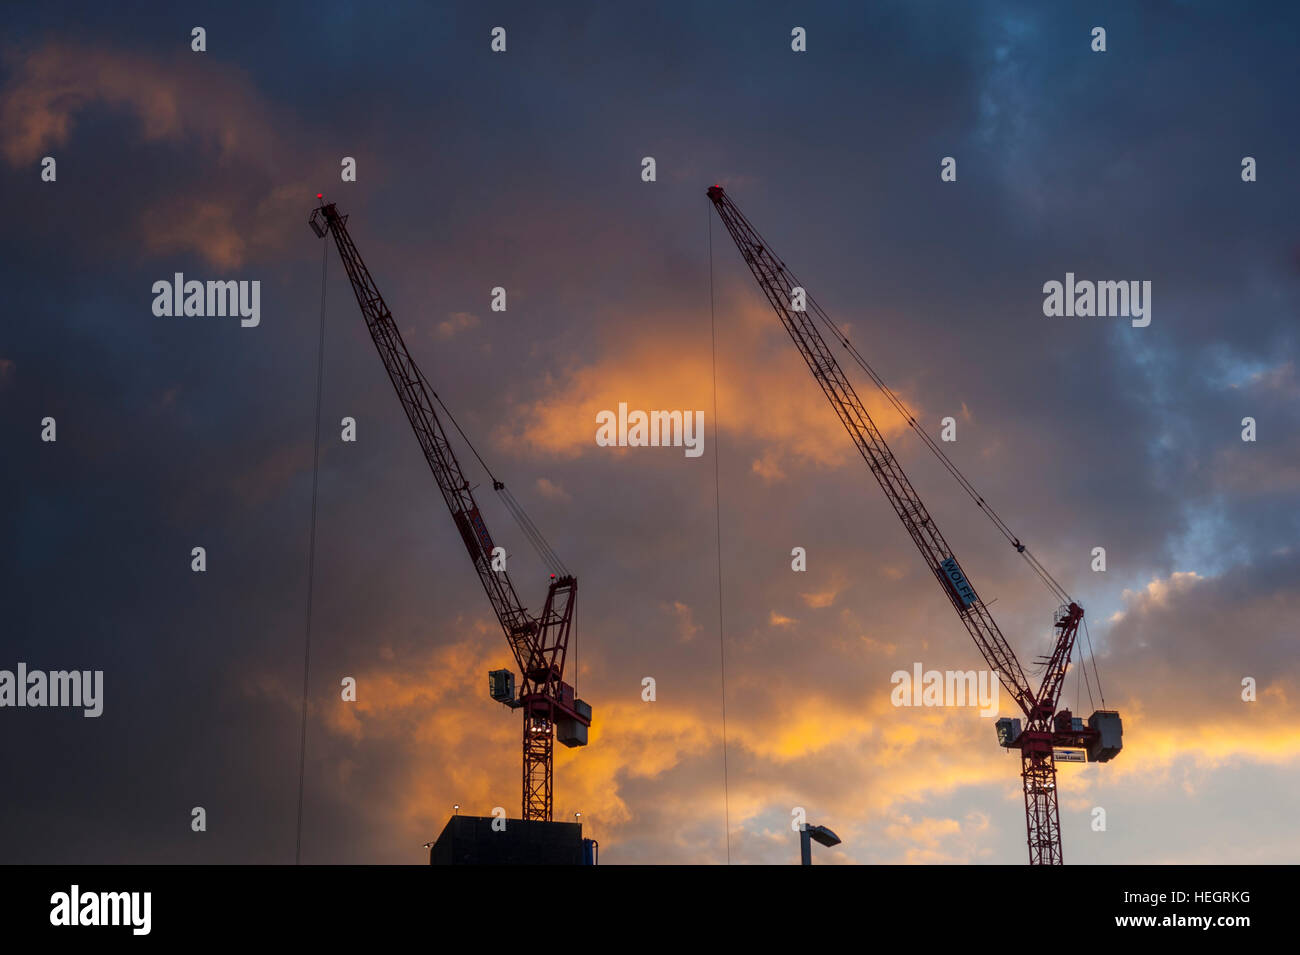 Lufting tower cranes against a sunset at Stratford East London. Stock Photo